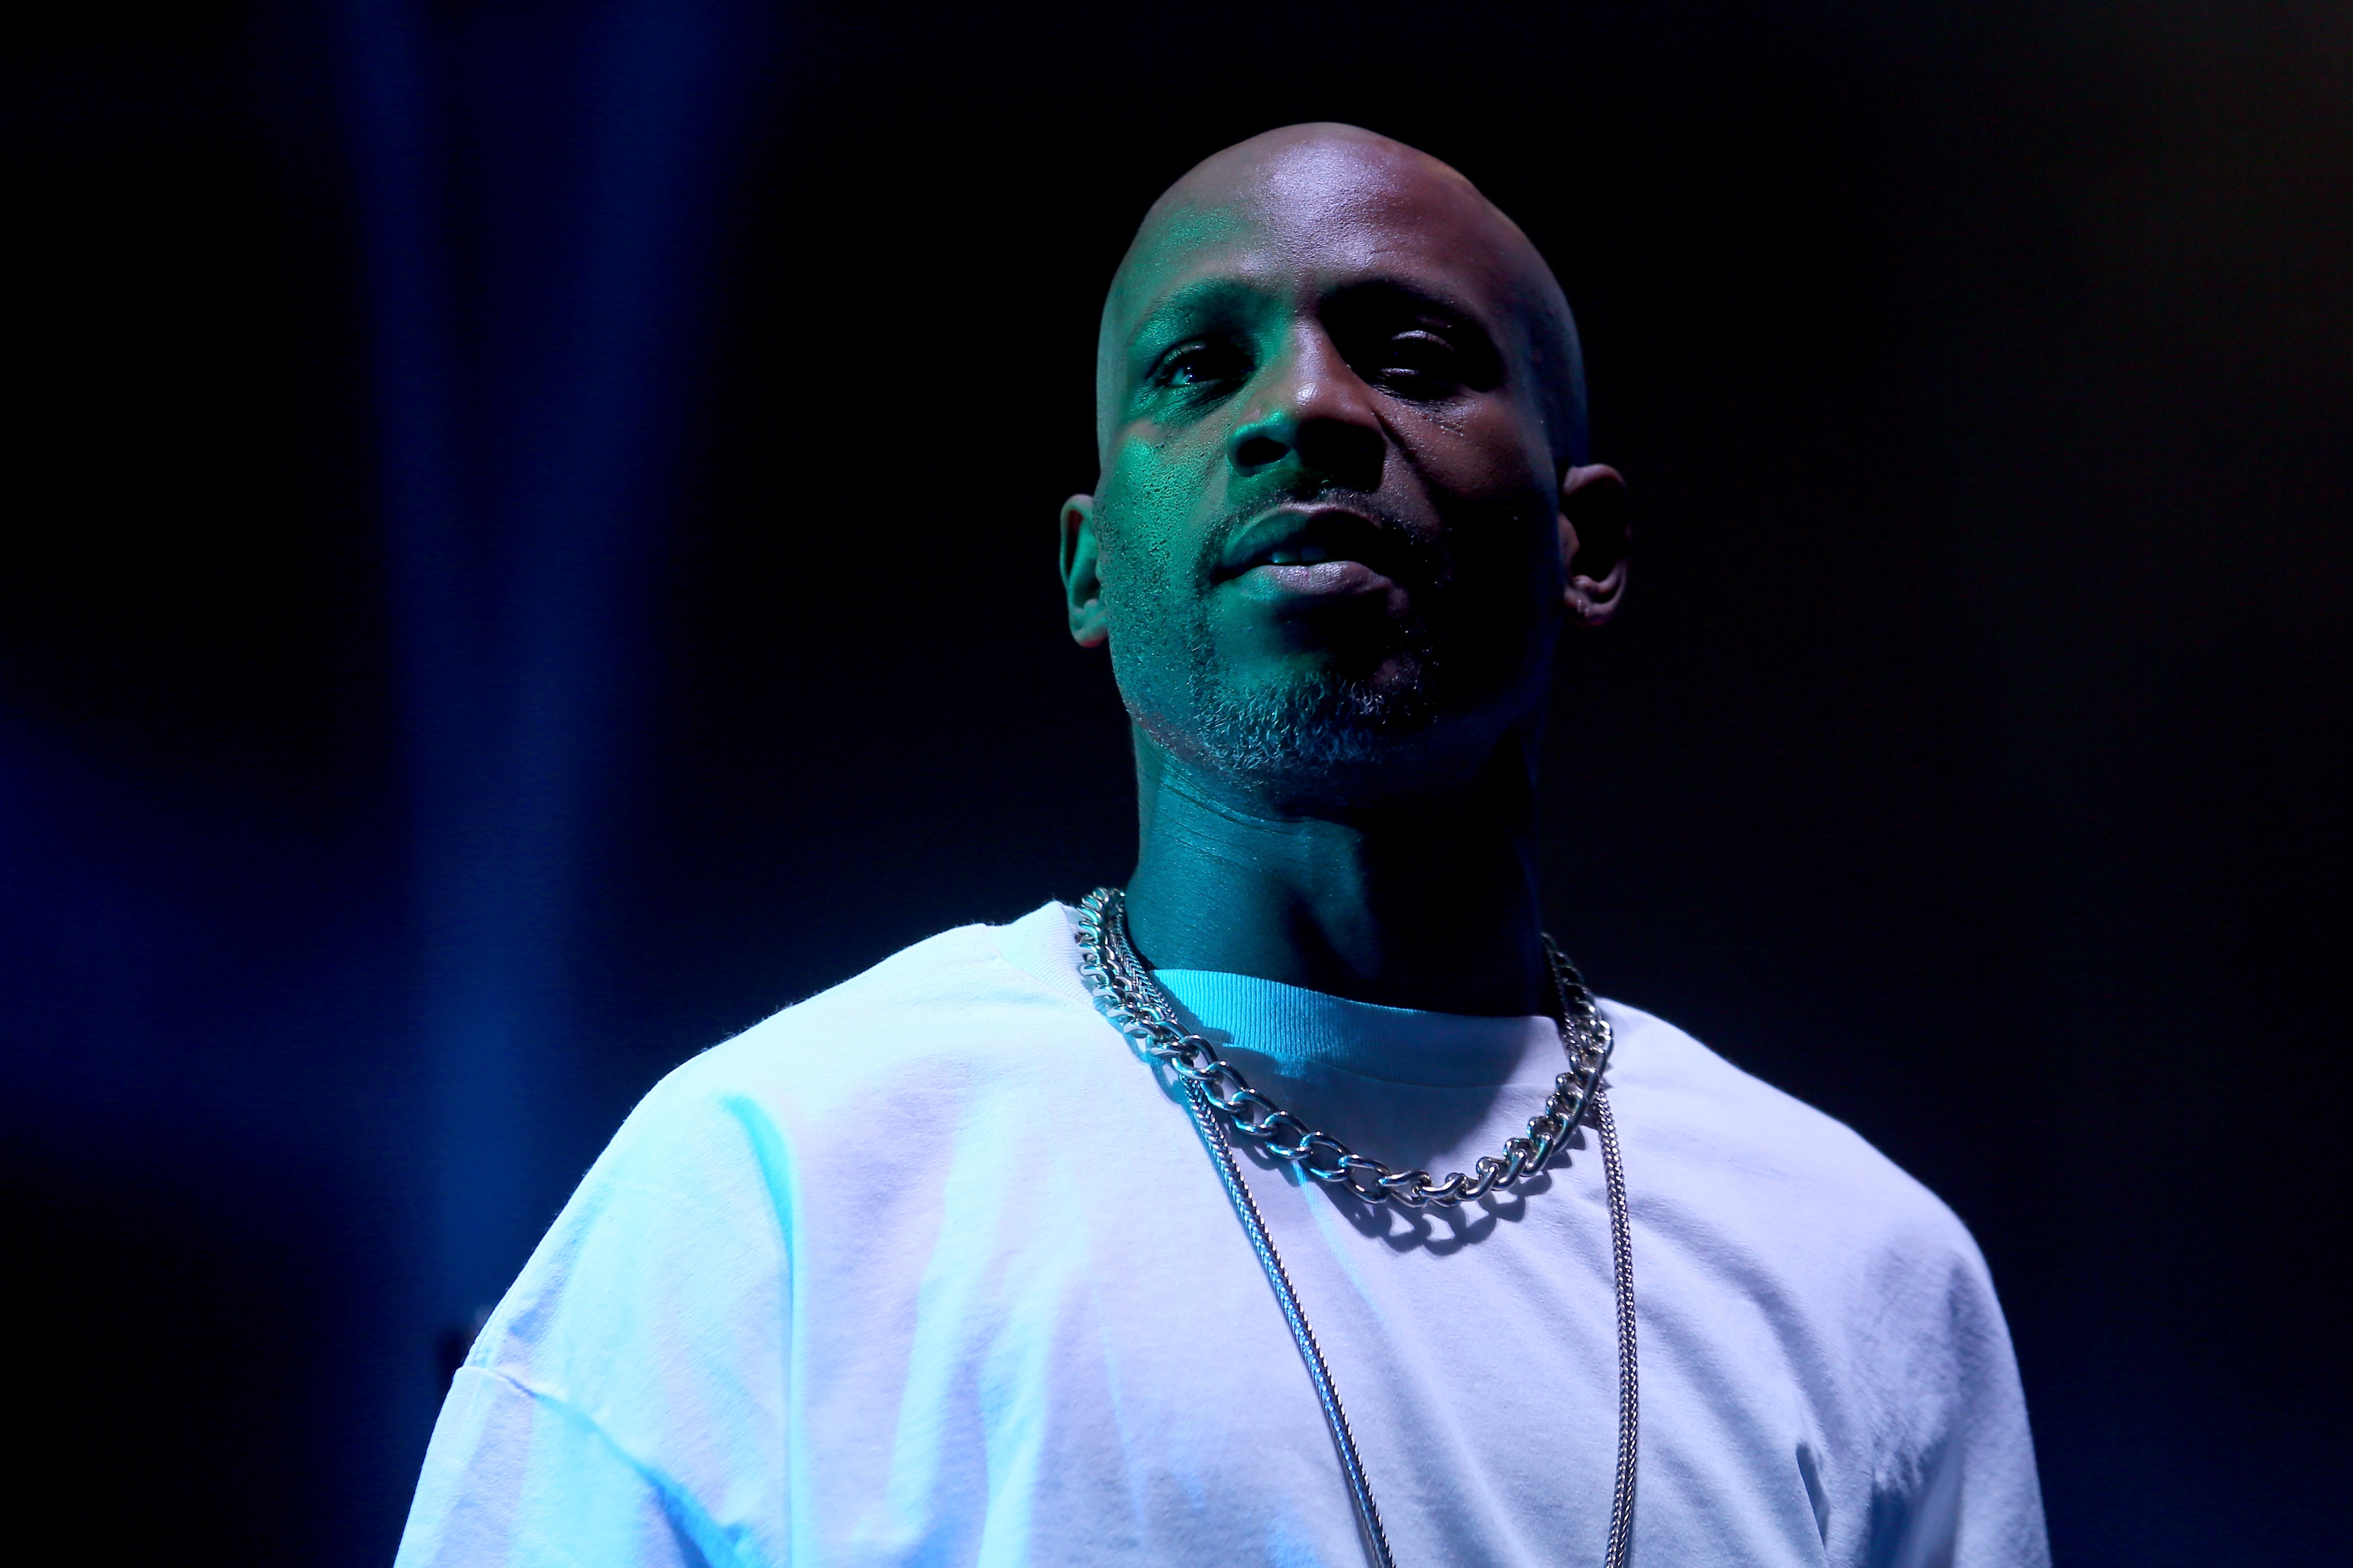 More 2 A Song: The Legacy of DMX